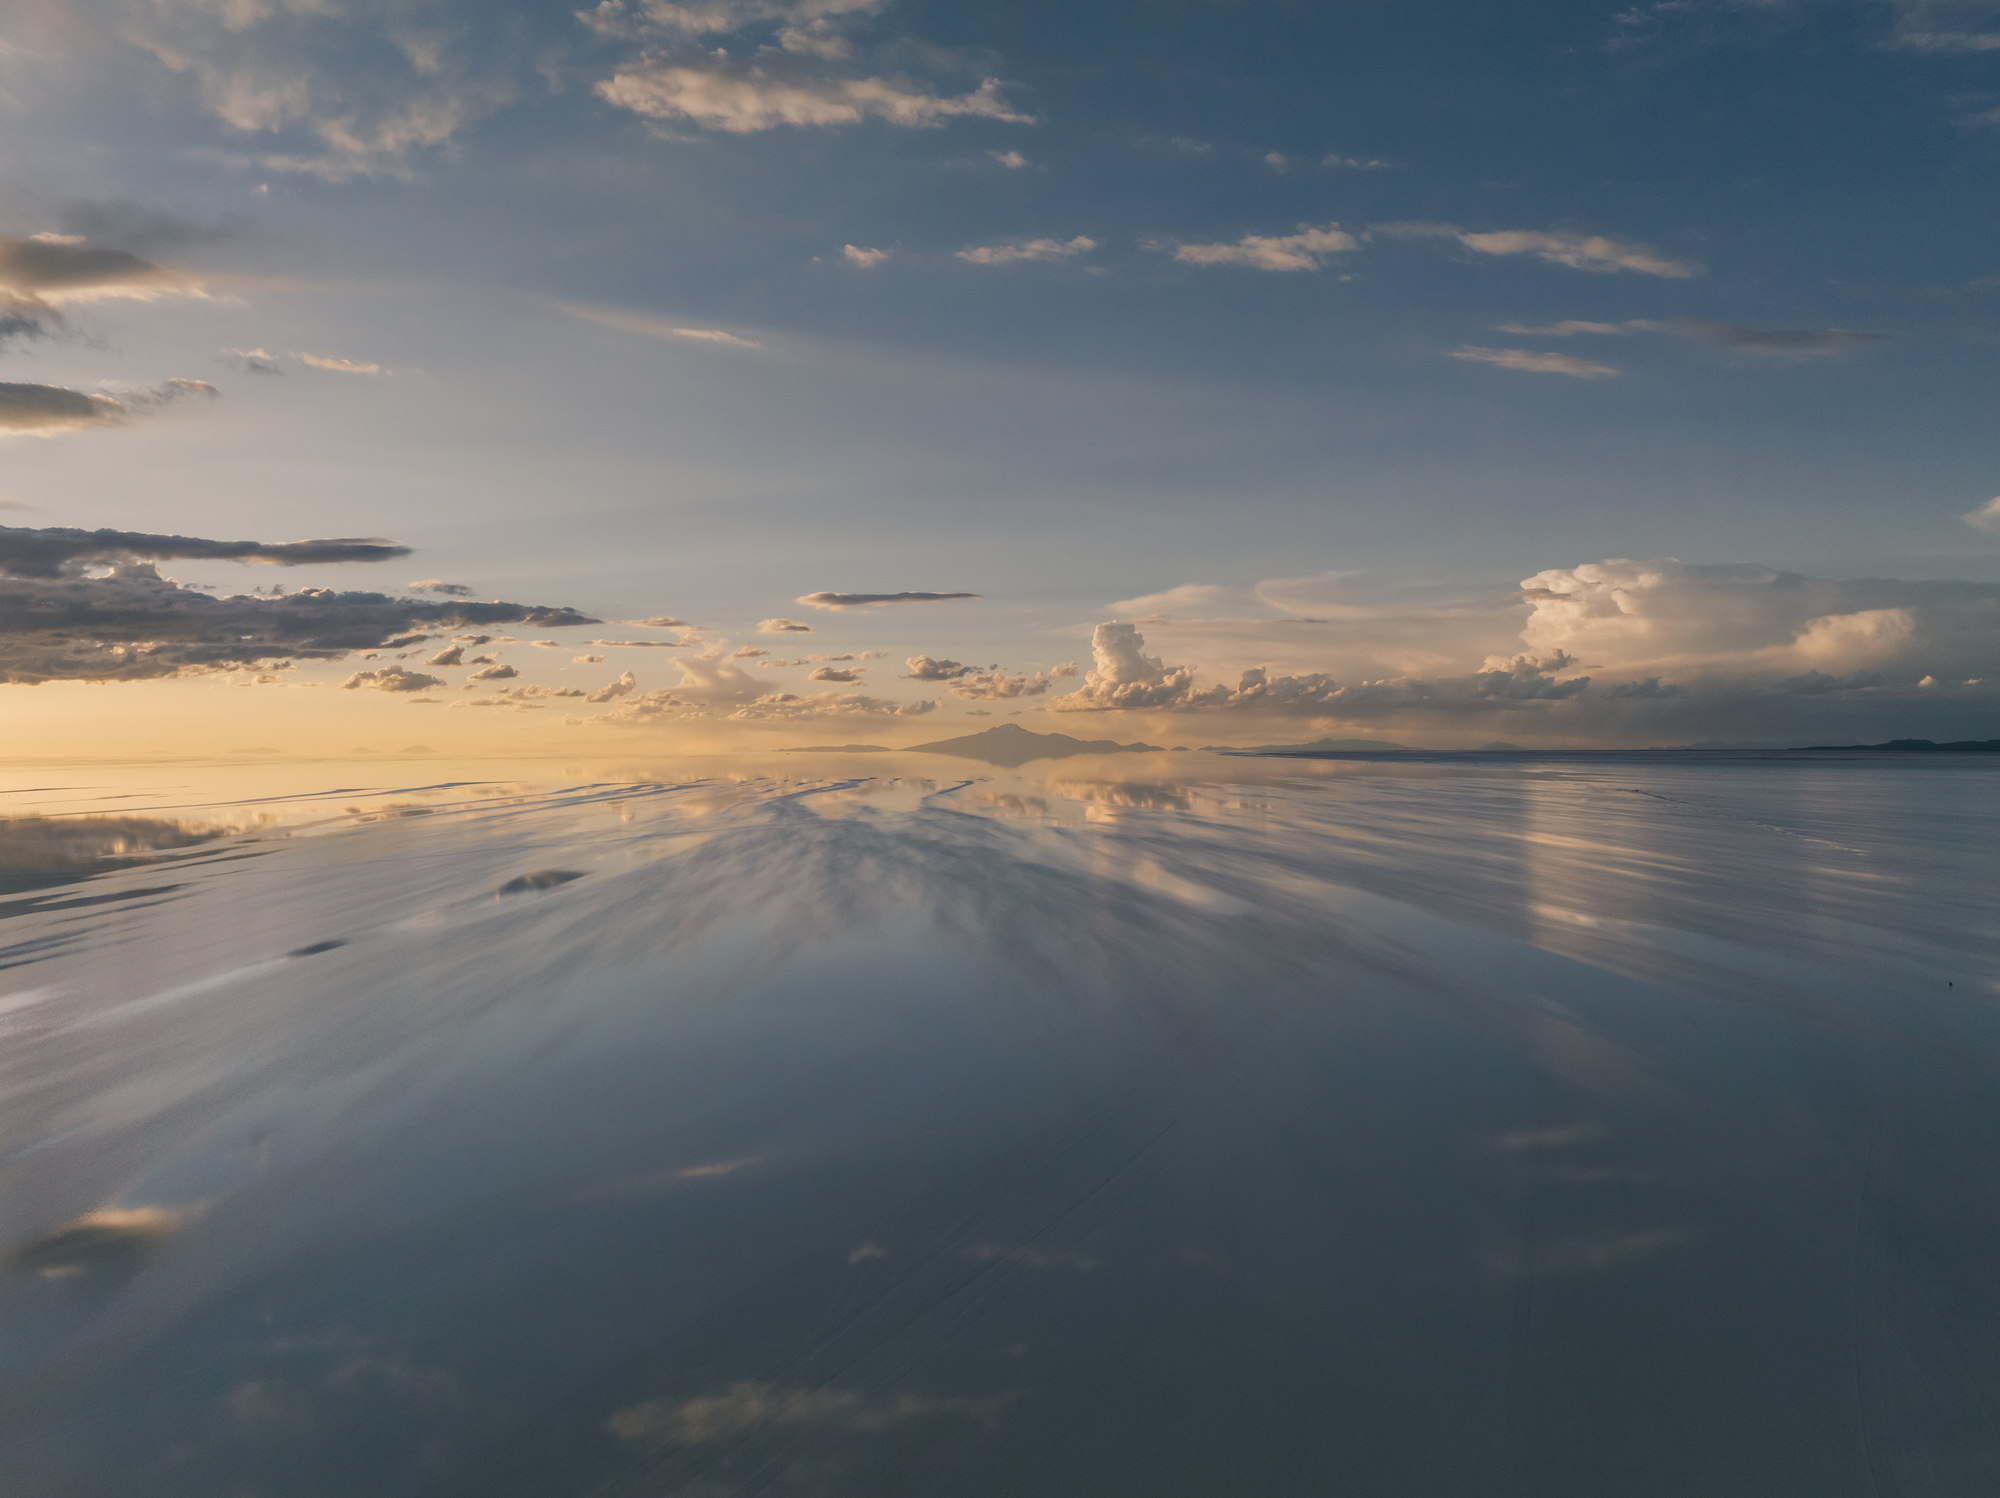 Cloudy sky reflected on a calm water surface at dusk